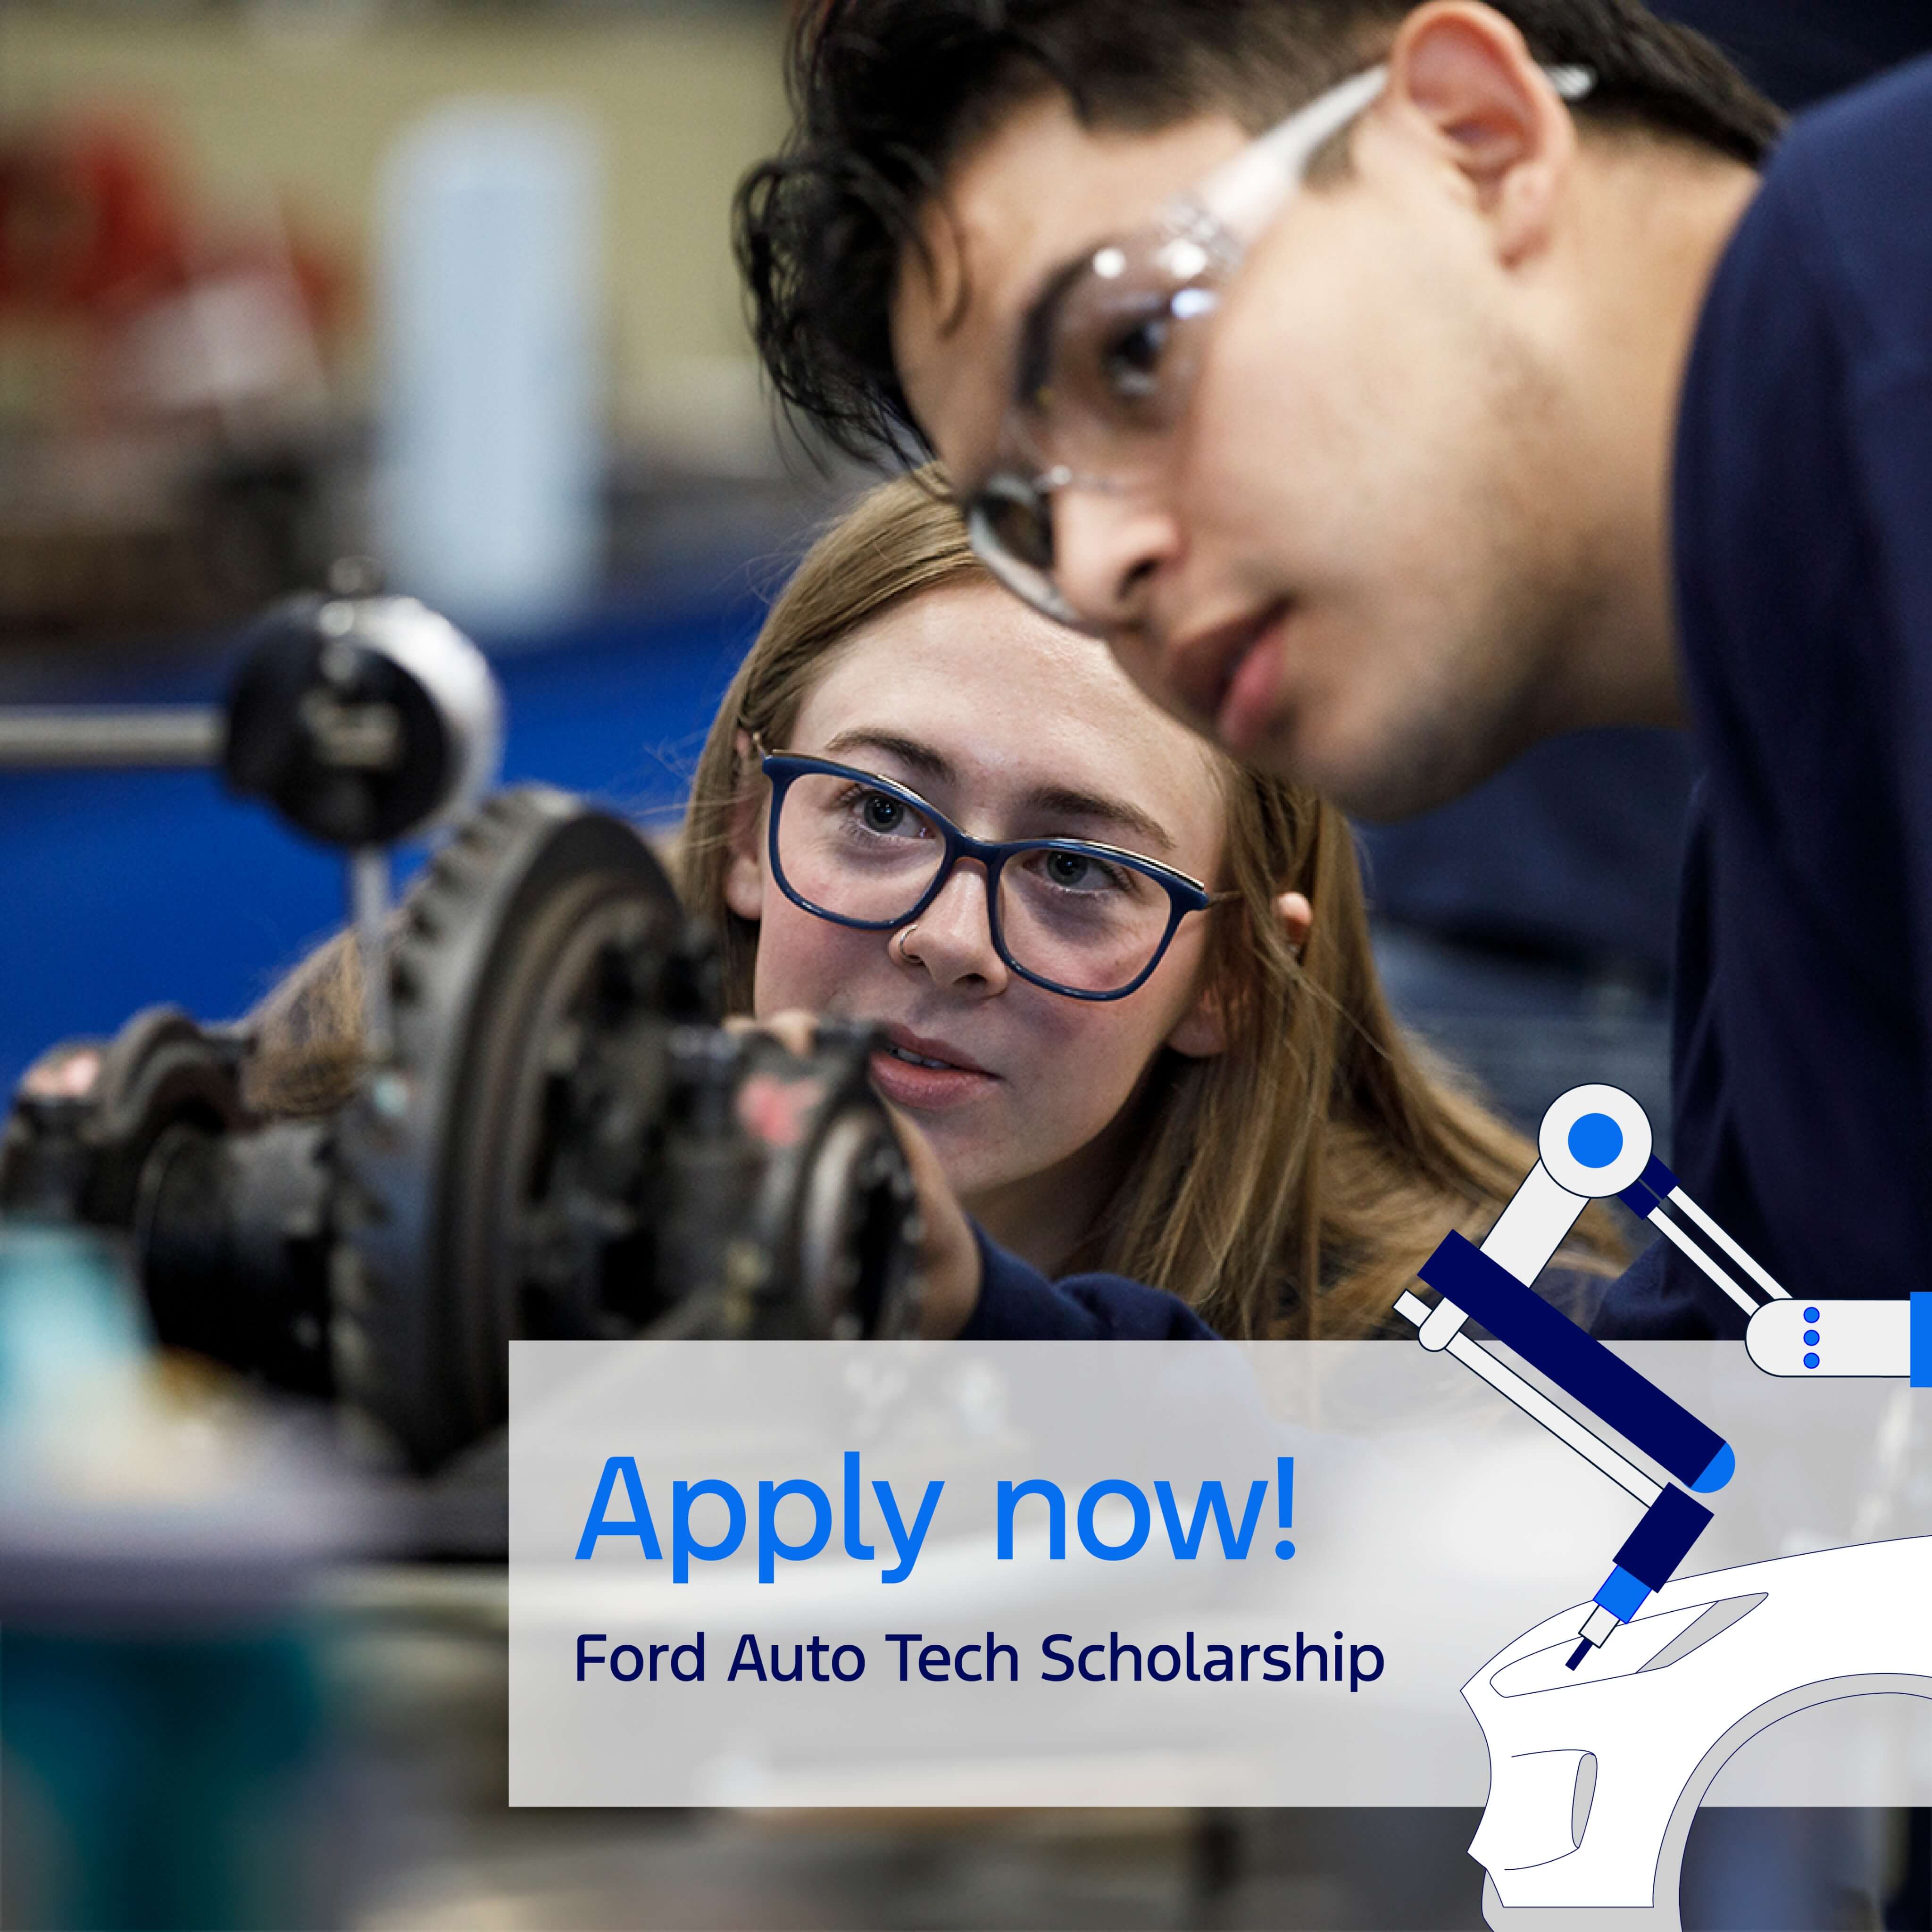 Apply now for a Ford Auto Technician Scholarship